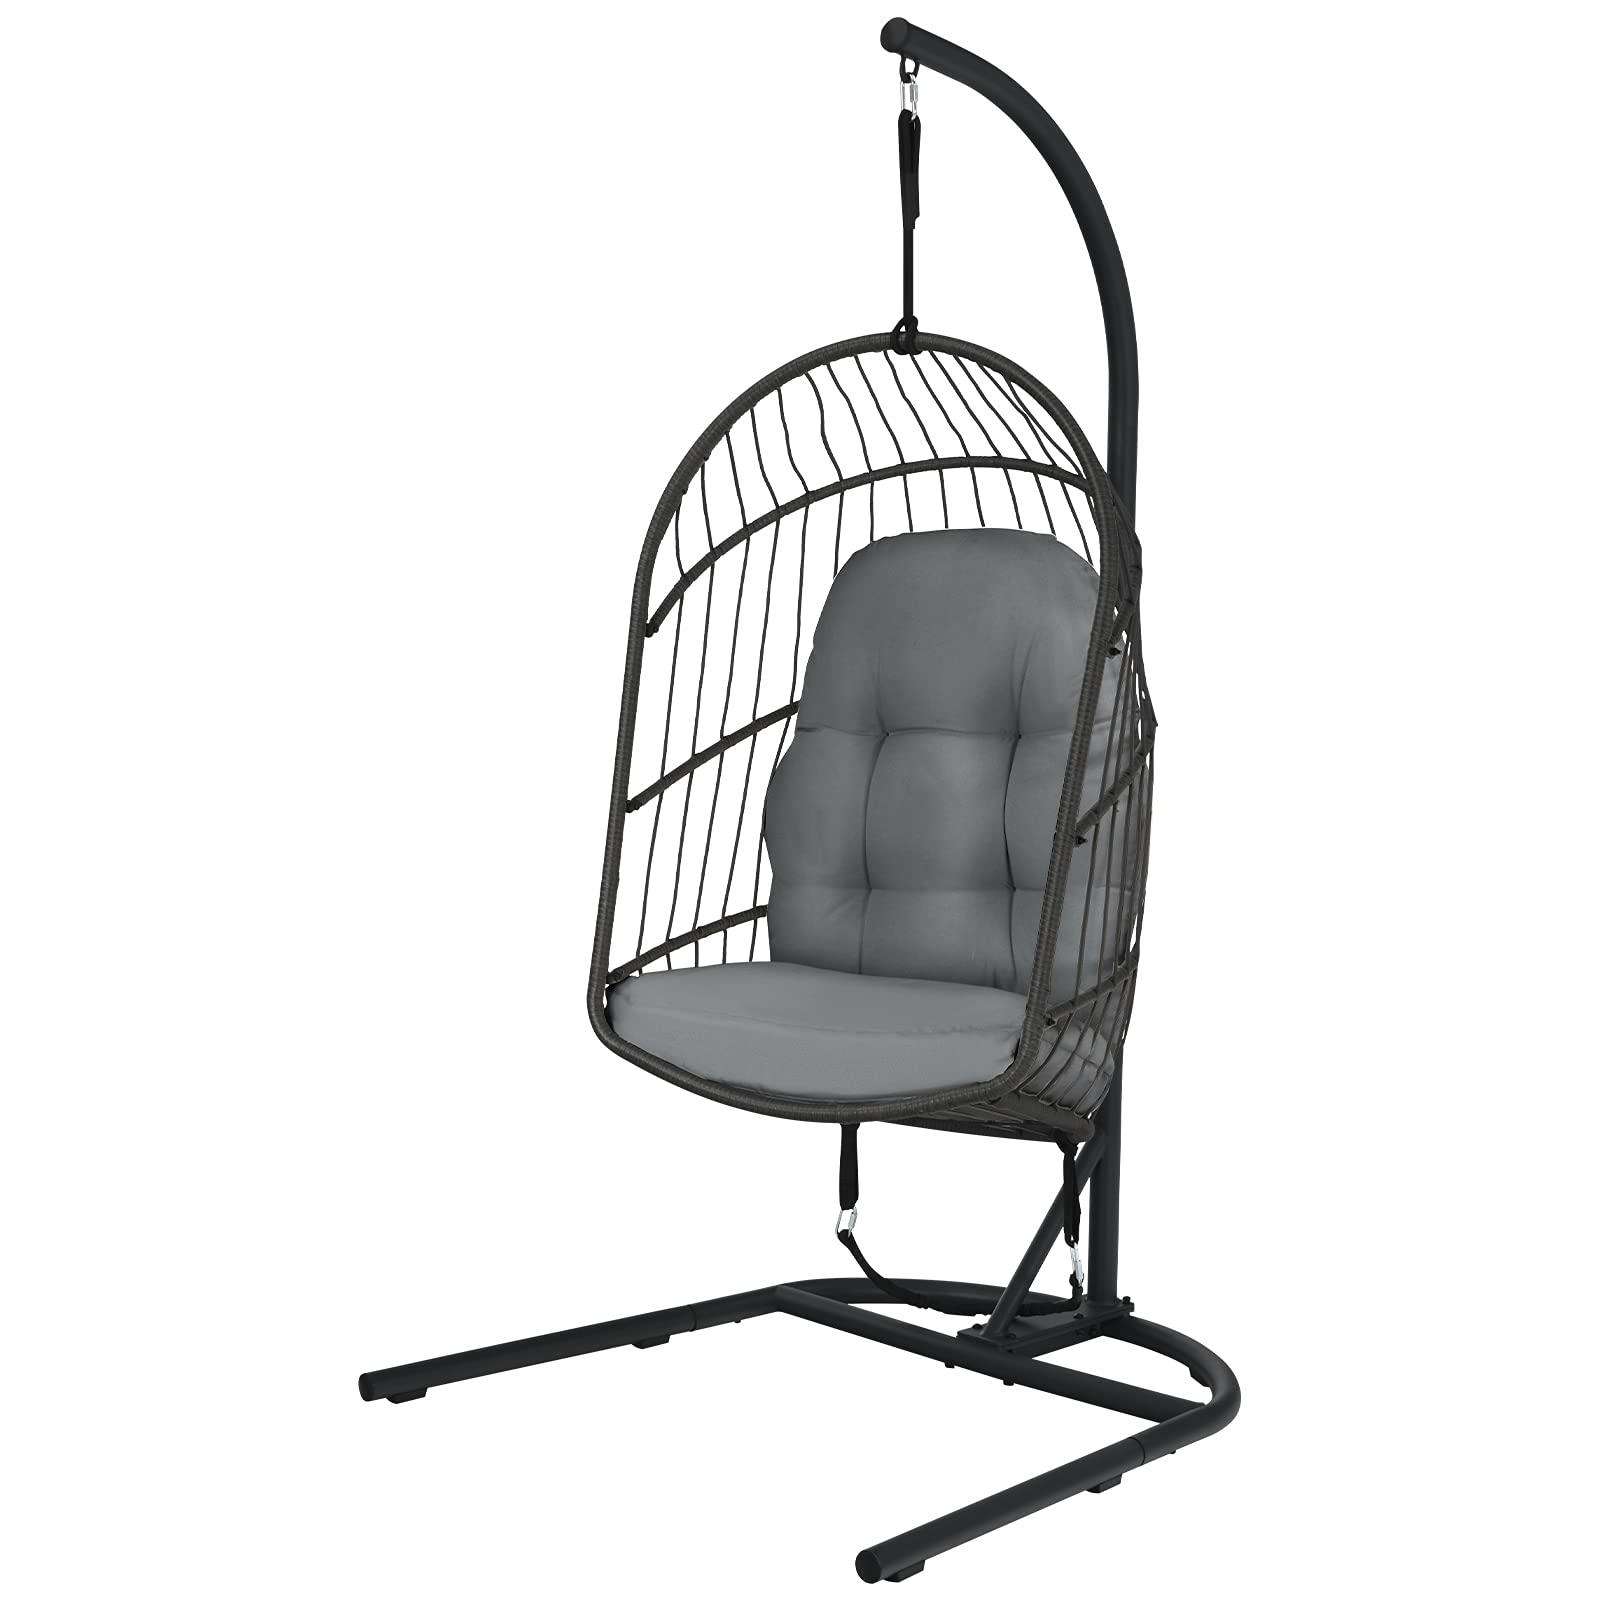 Giantex Hanging Egg Chair with Stand